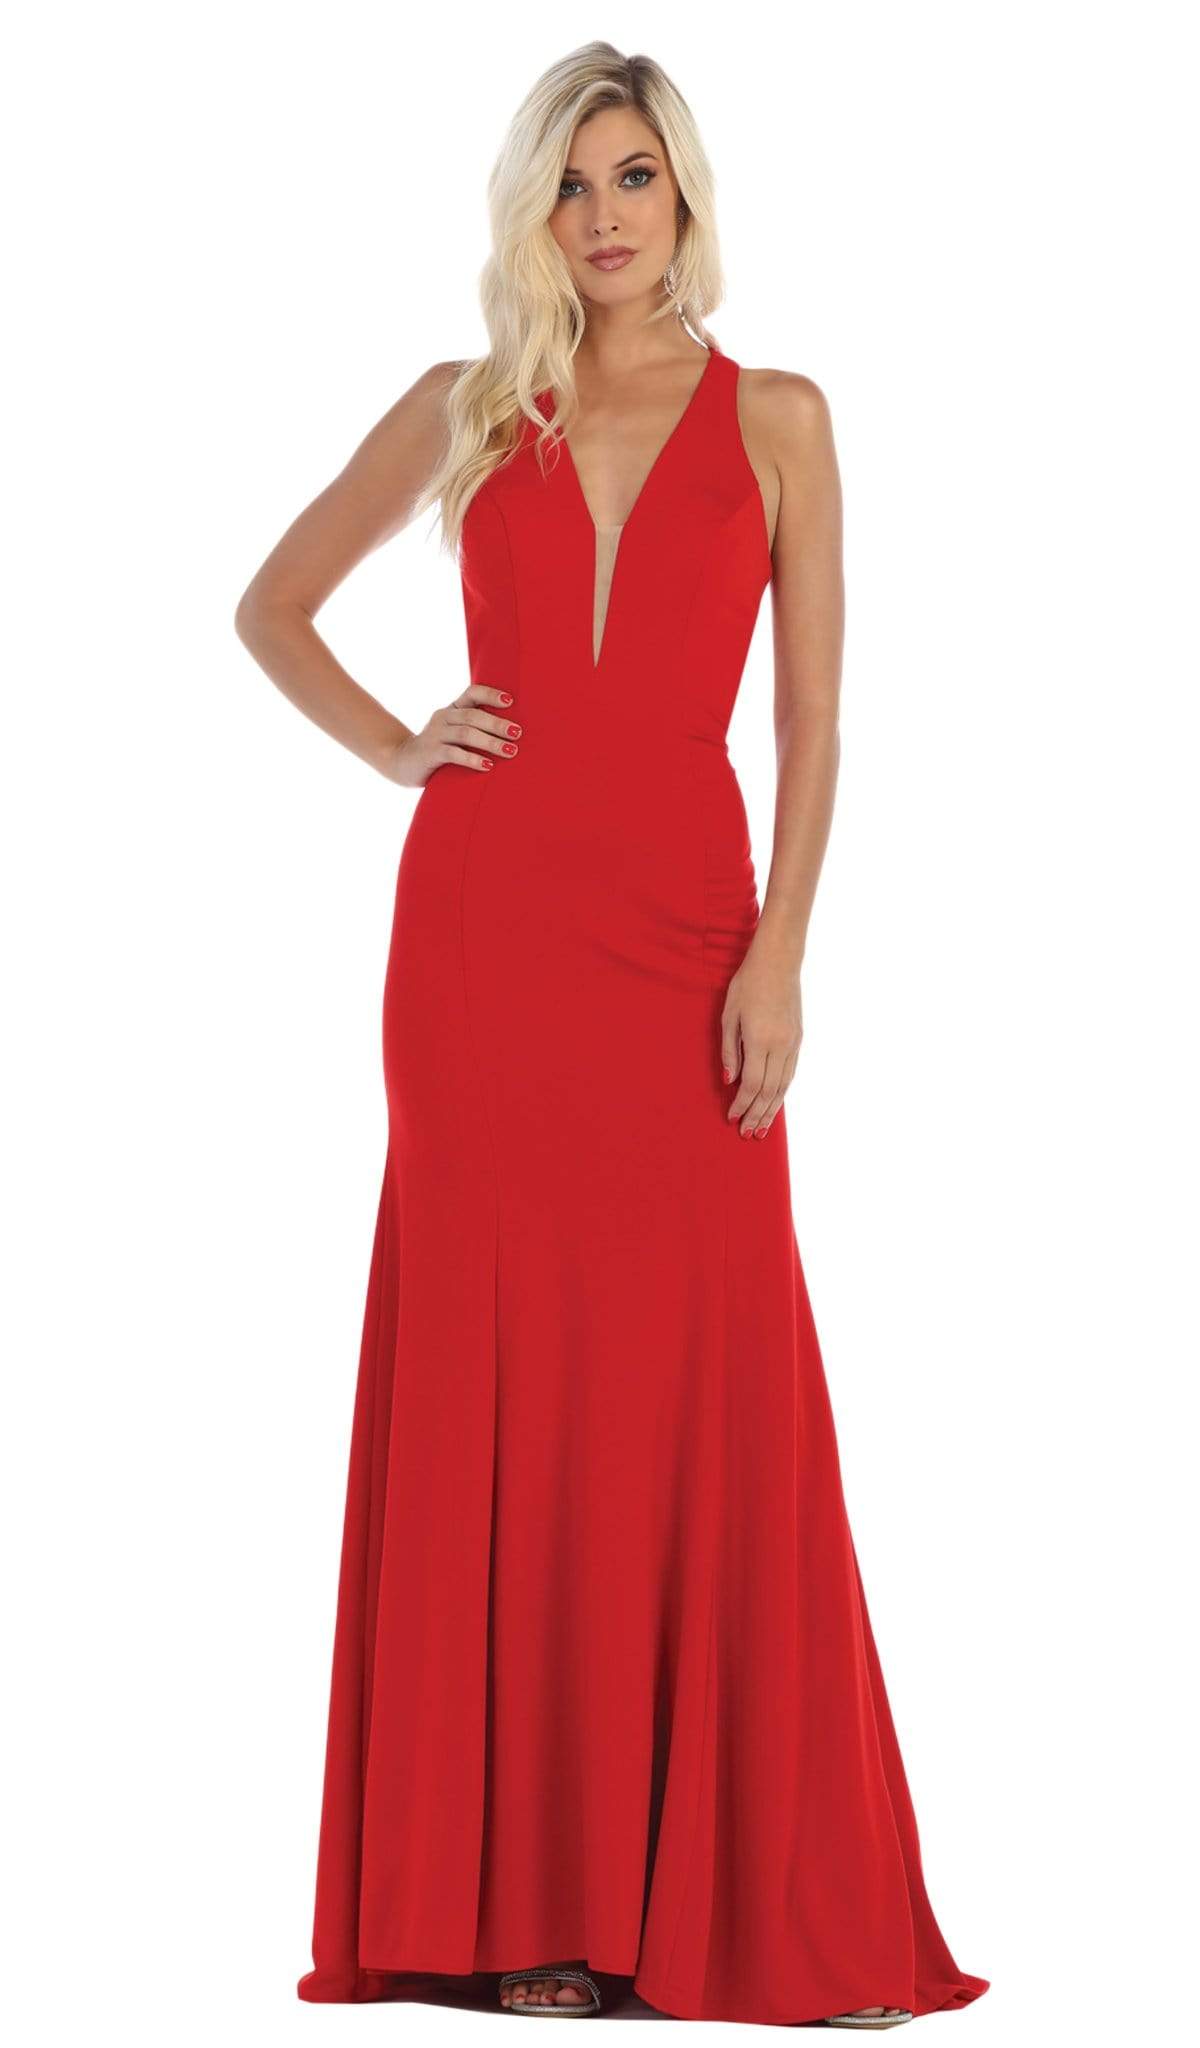 May Queen - MQ1636 Halter Crisscross Straps Open Back Mermaid Gown Special Occasion Dress 2 / Red